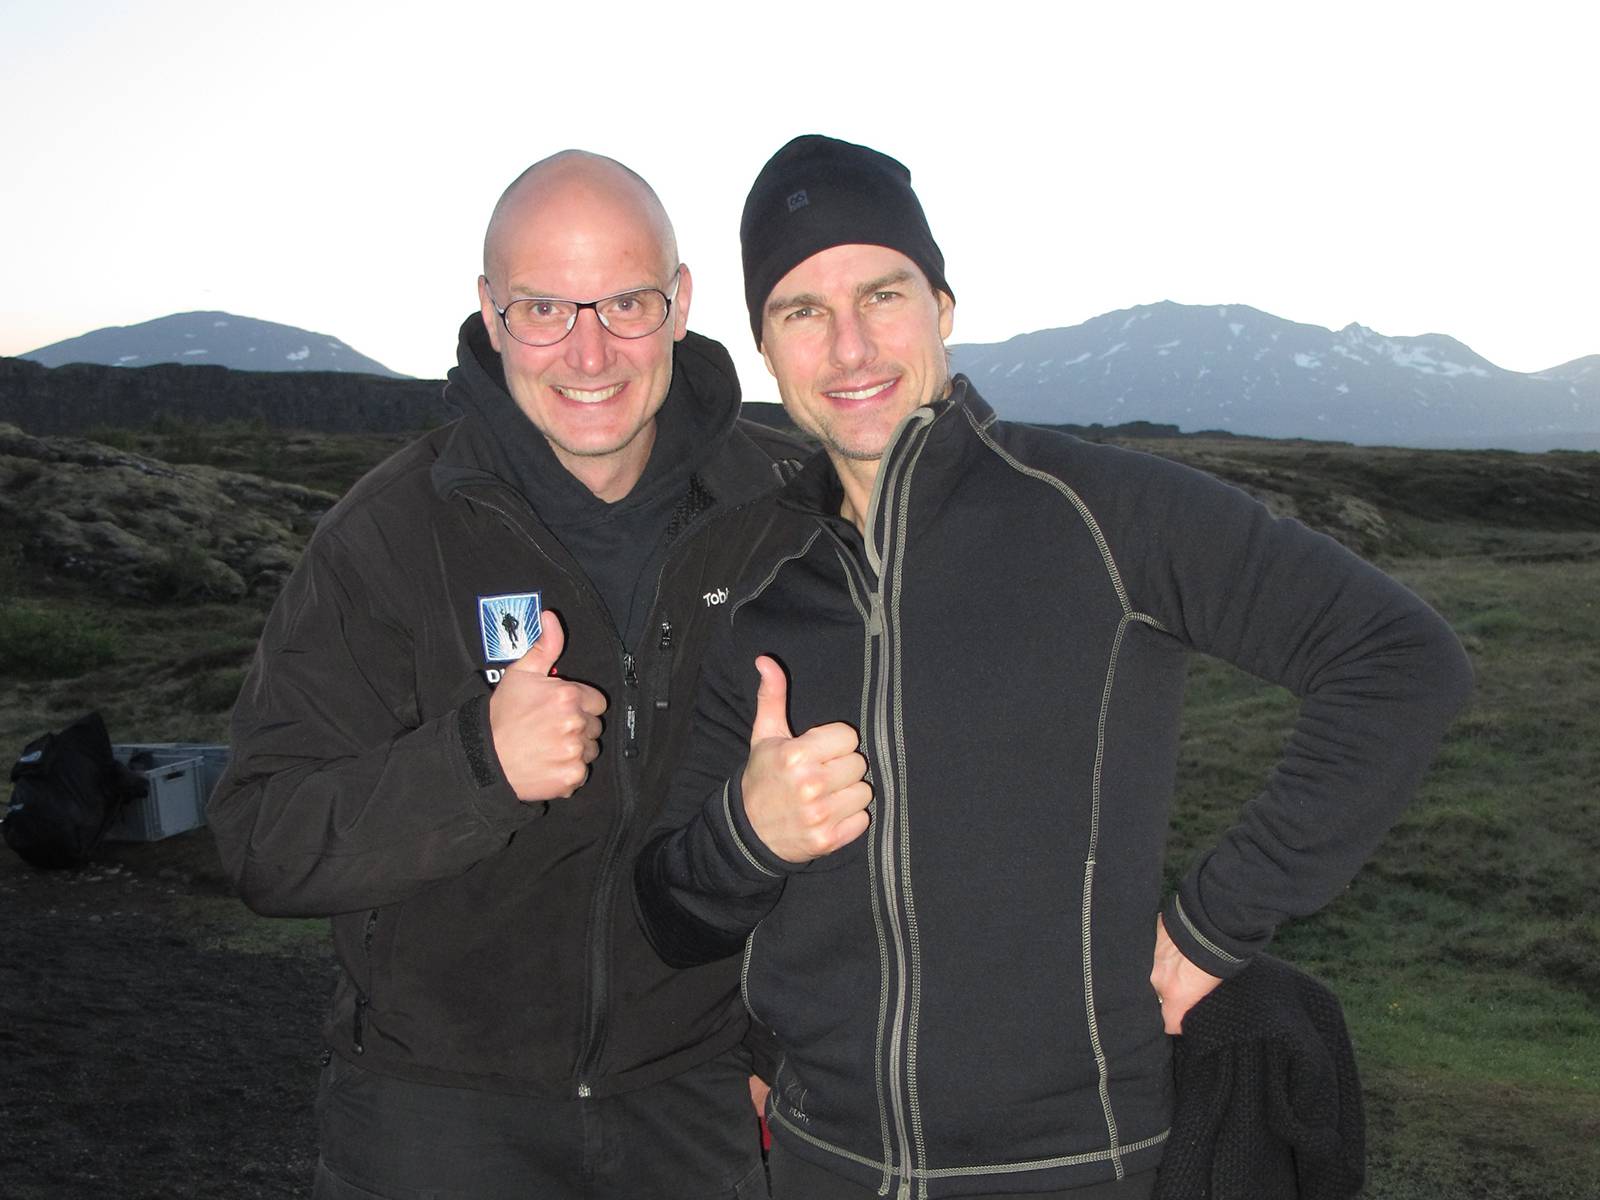 Tom Cruise & Tobias Klose giving thumbs up after scuba diving in Silfra Iceland